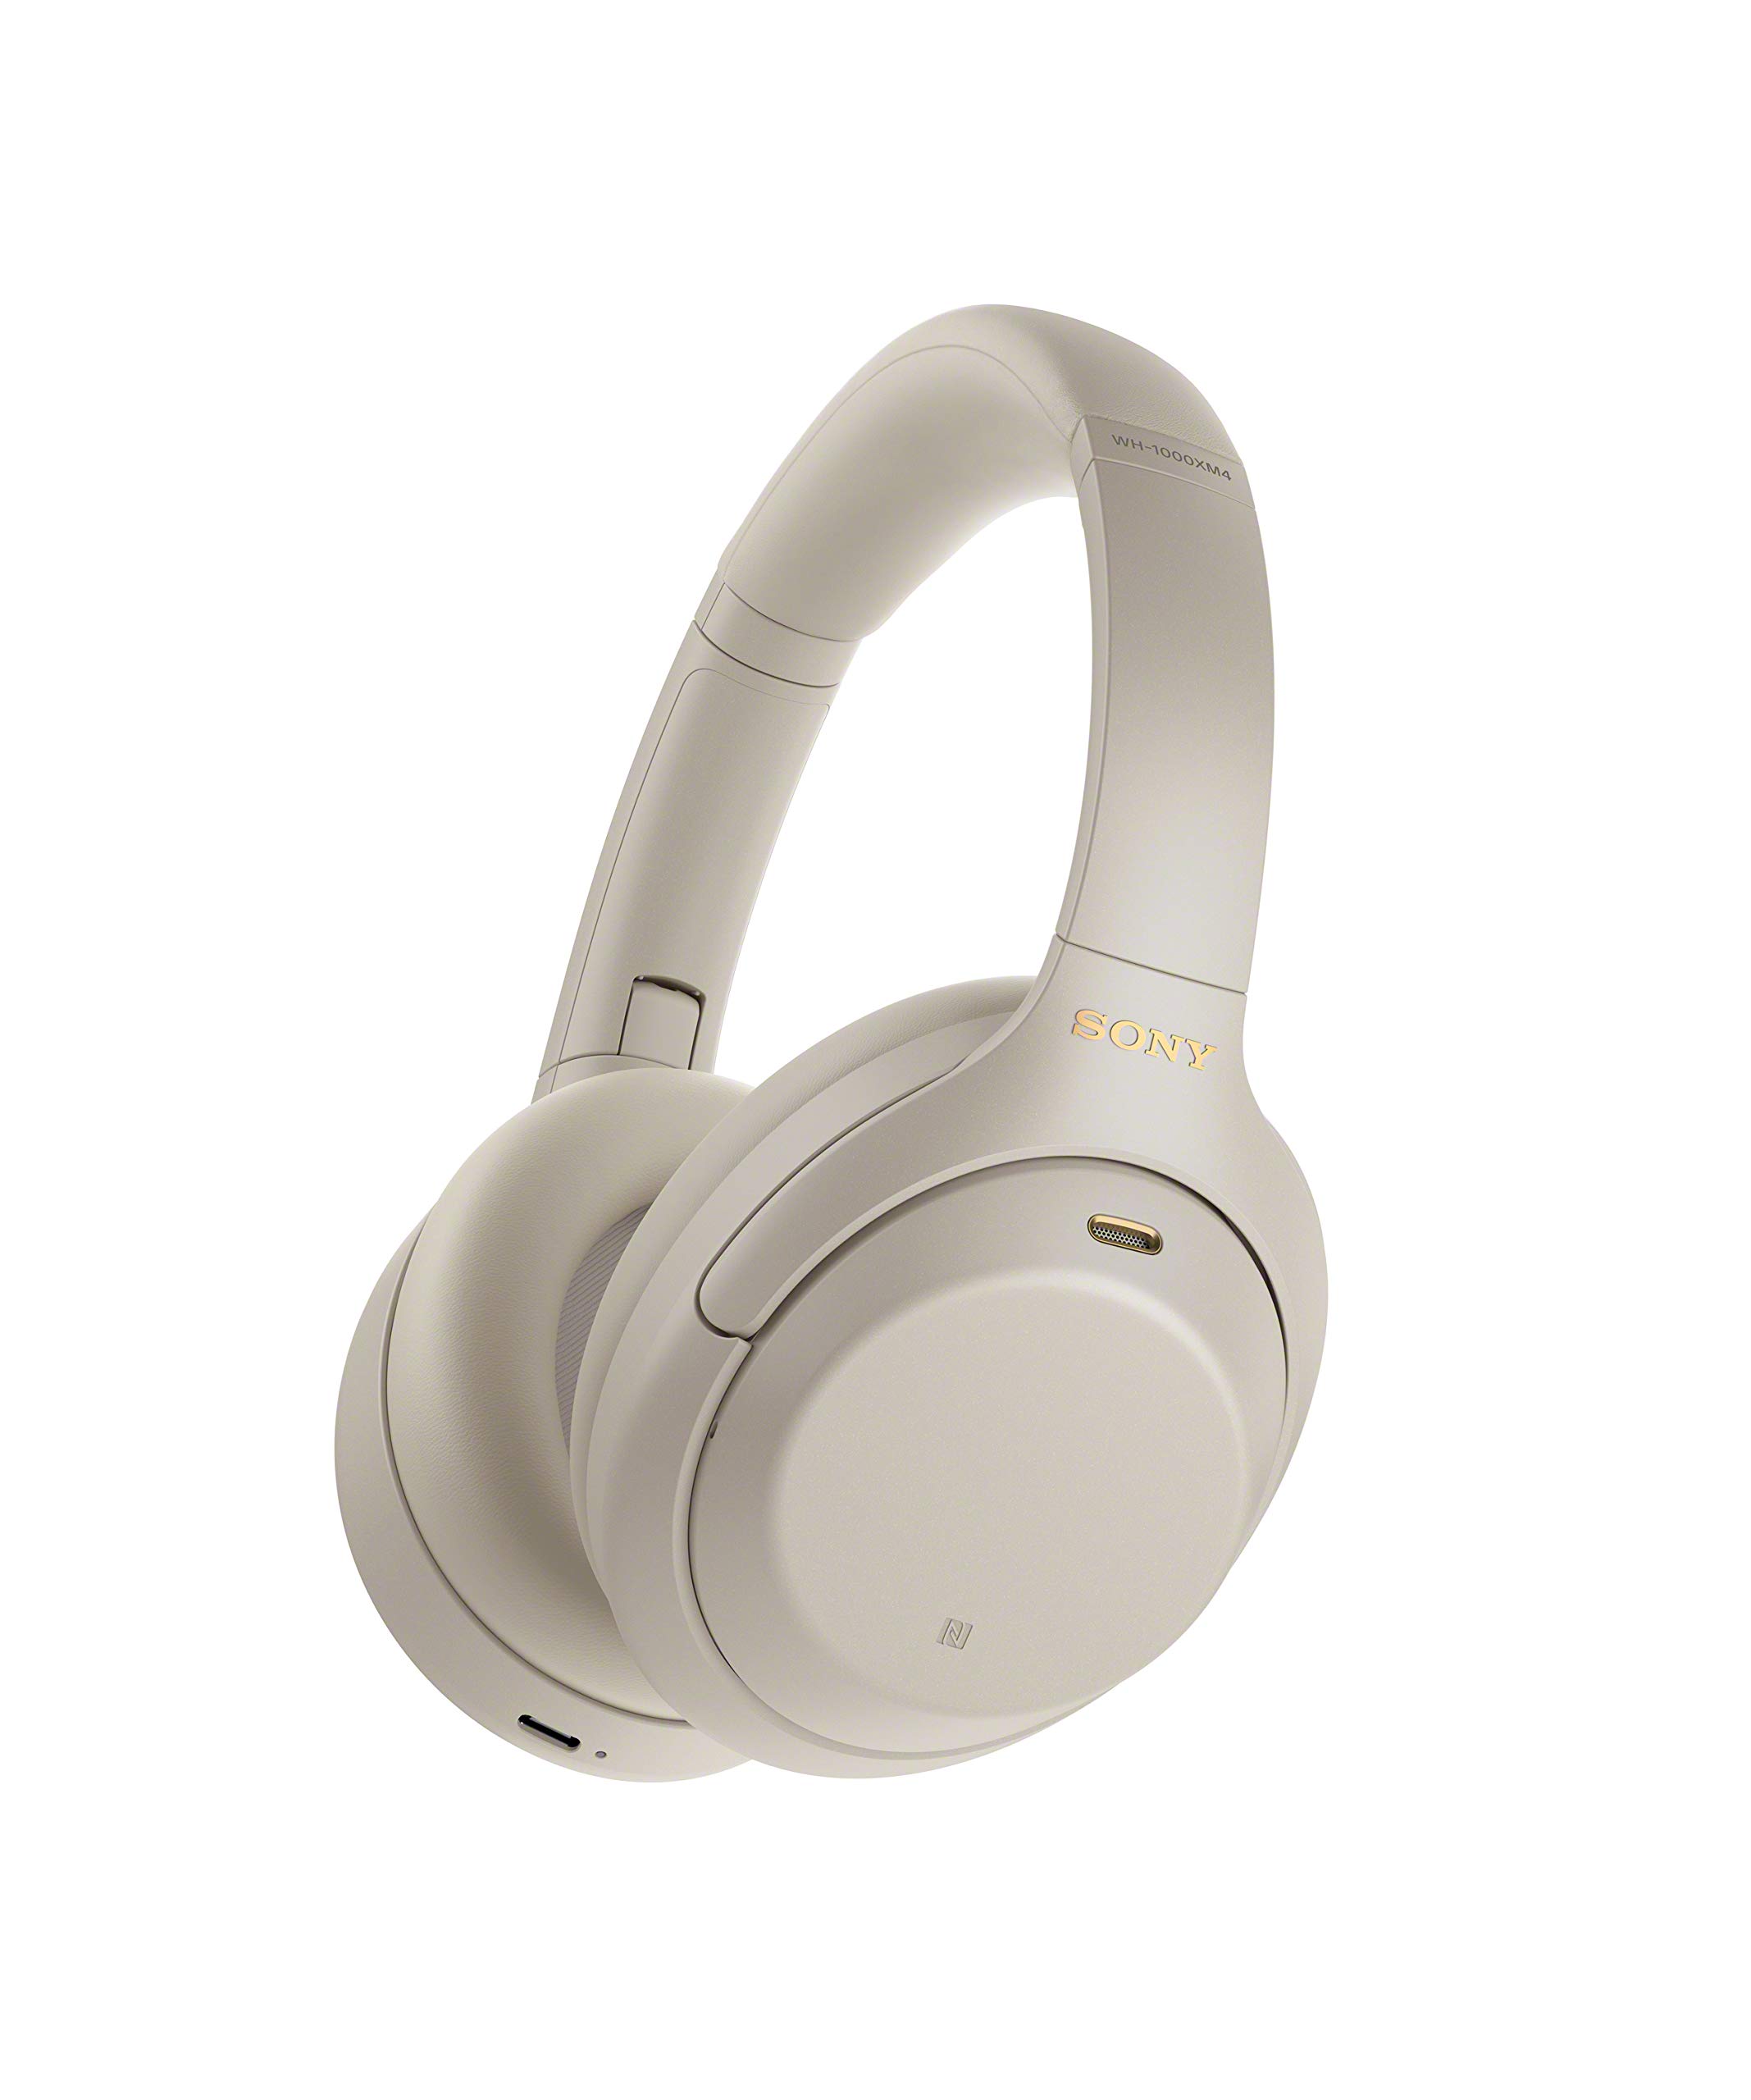 SONY WH-1000XM4 HEADPHONES - SILVER (Refurbished) $150 at Secondipity